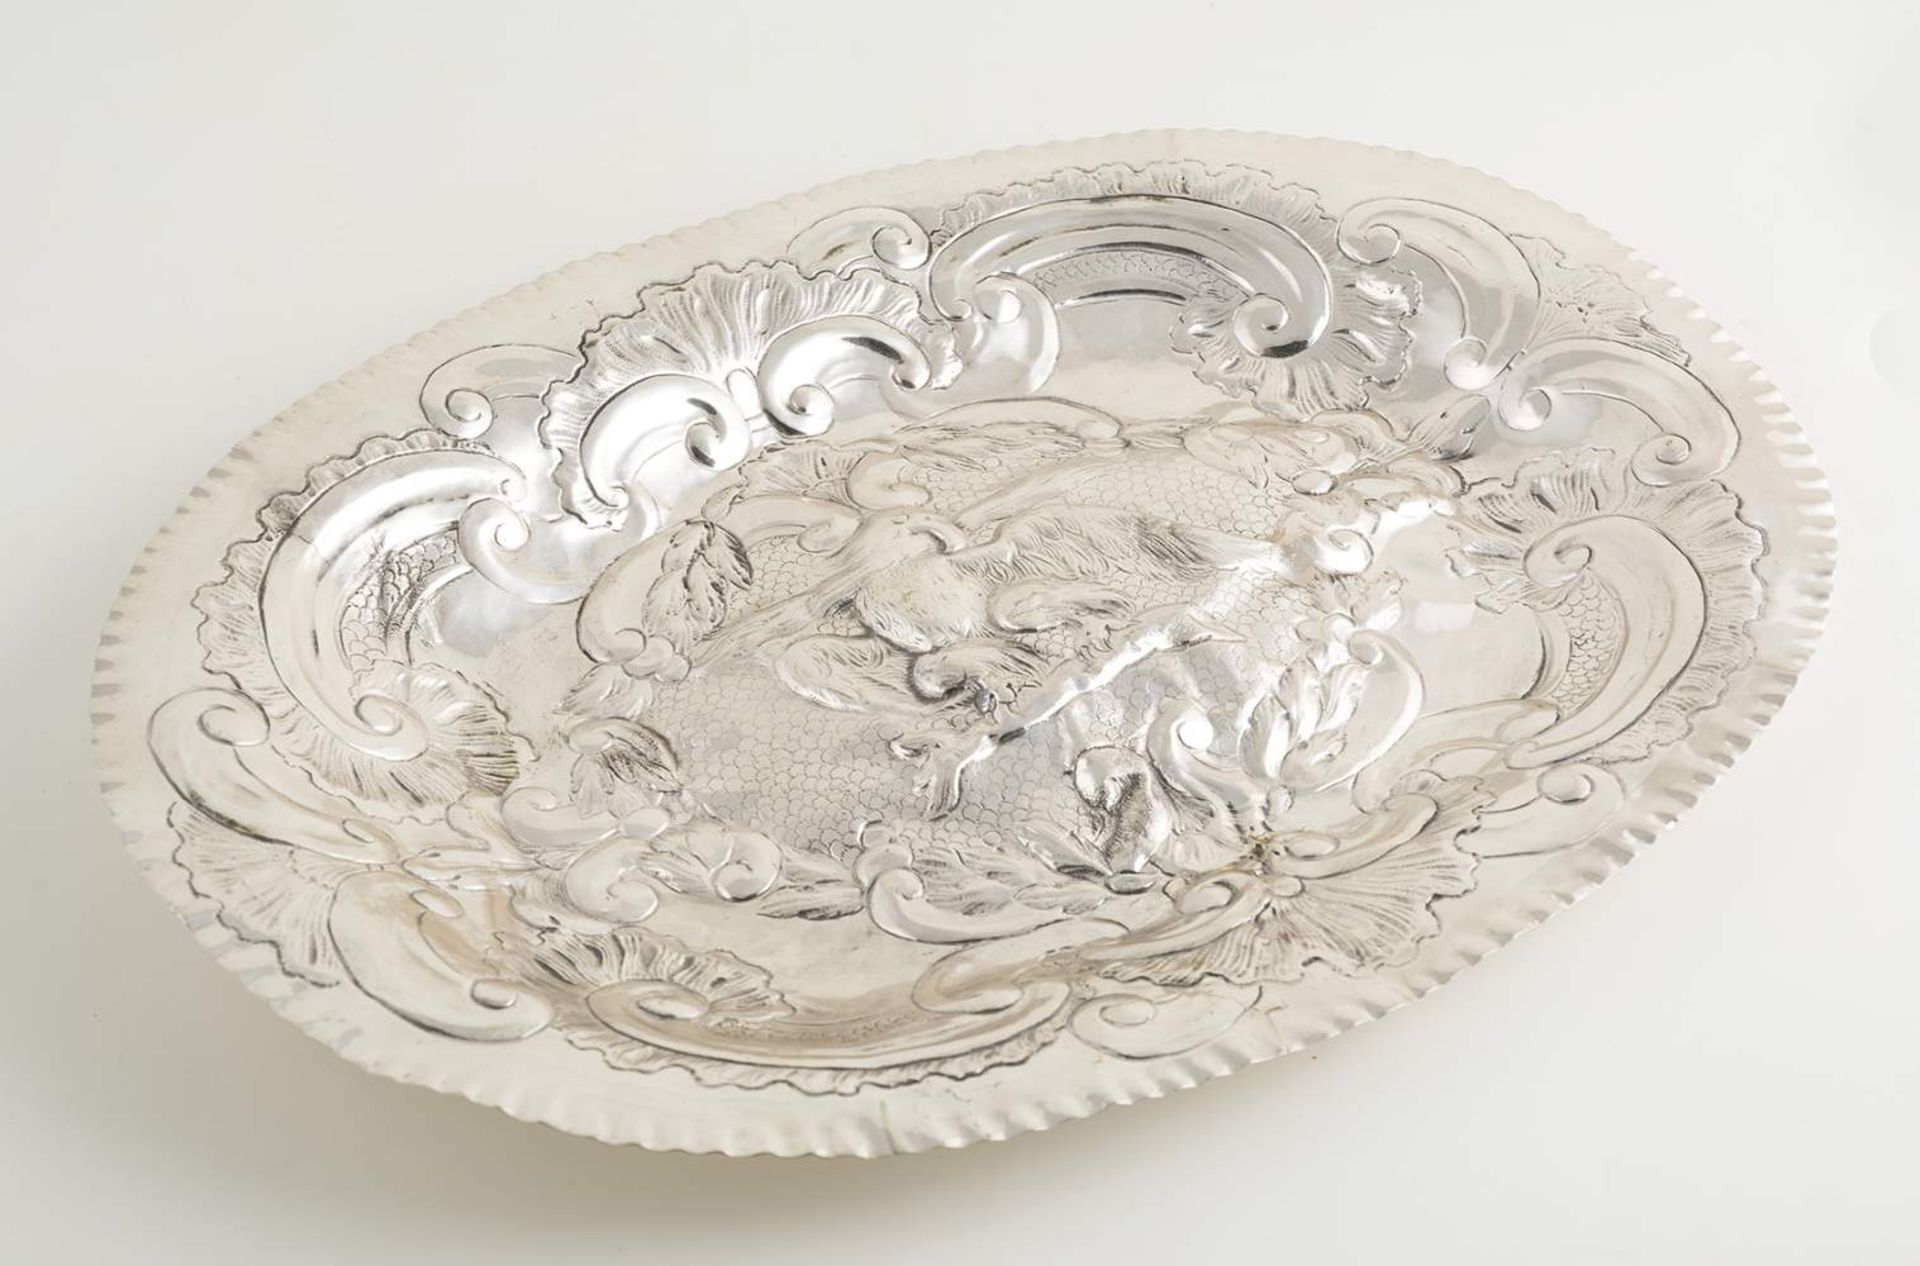 Spanish tray made of engraved and embossed silver. 18th century. Hallmarked Estrada. Pretty